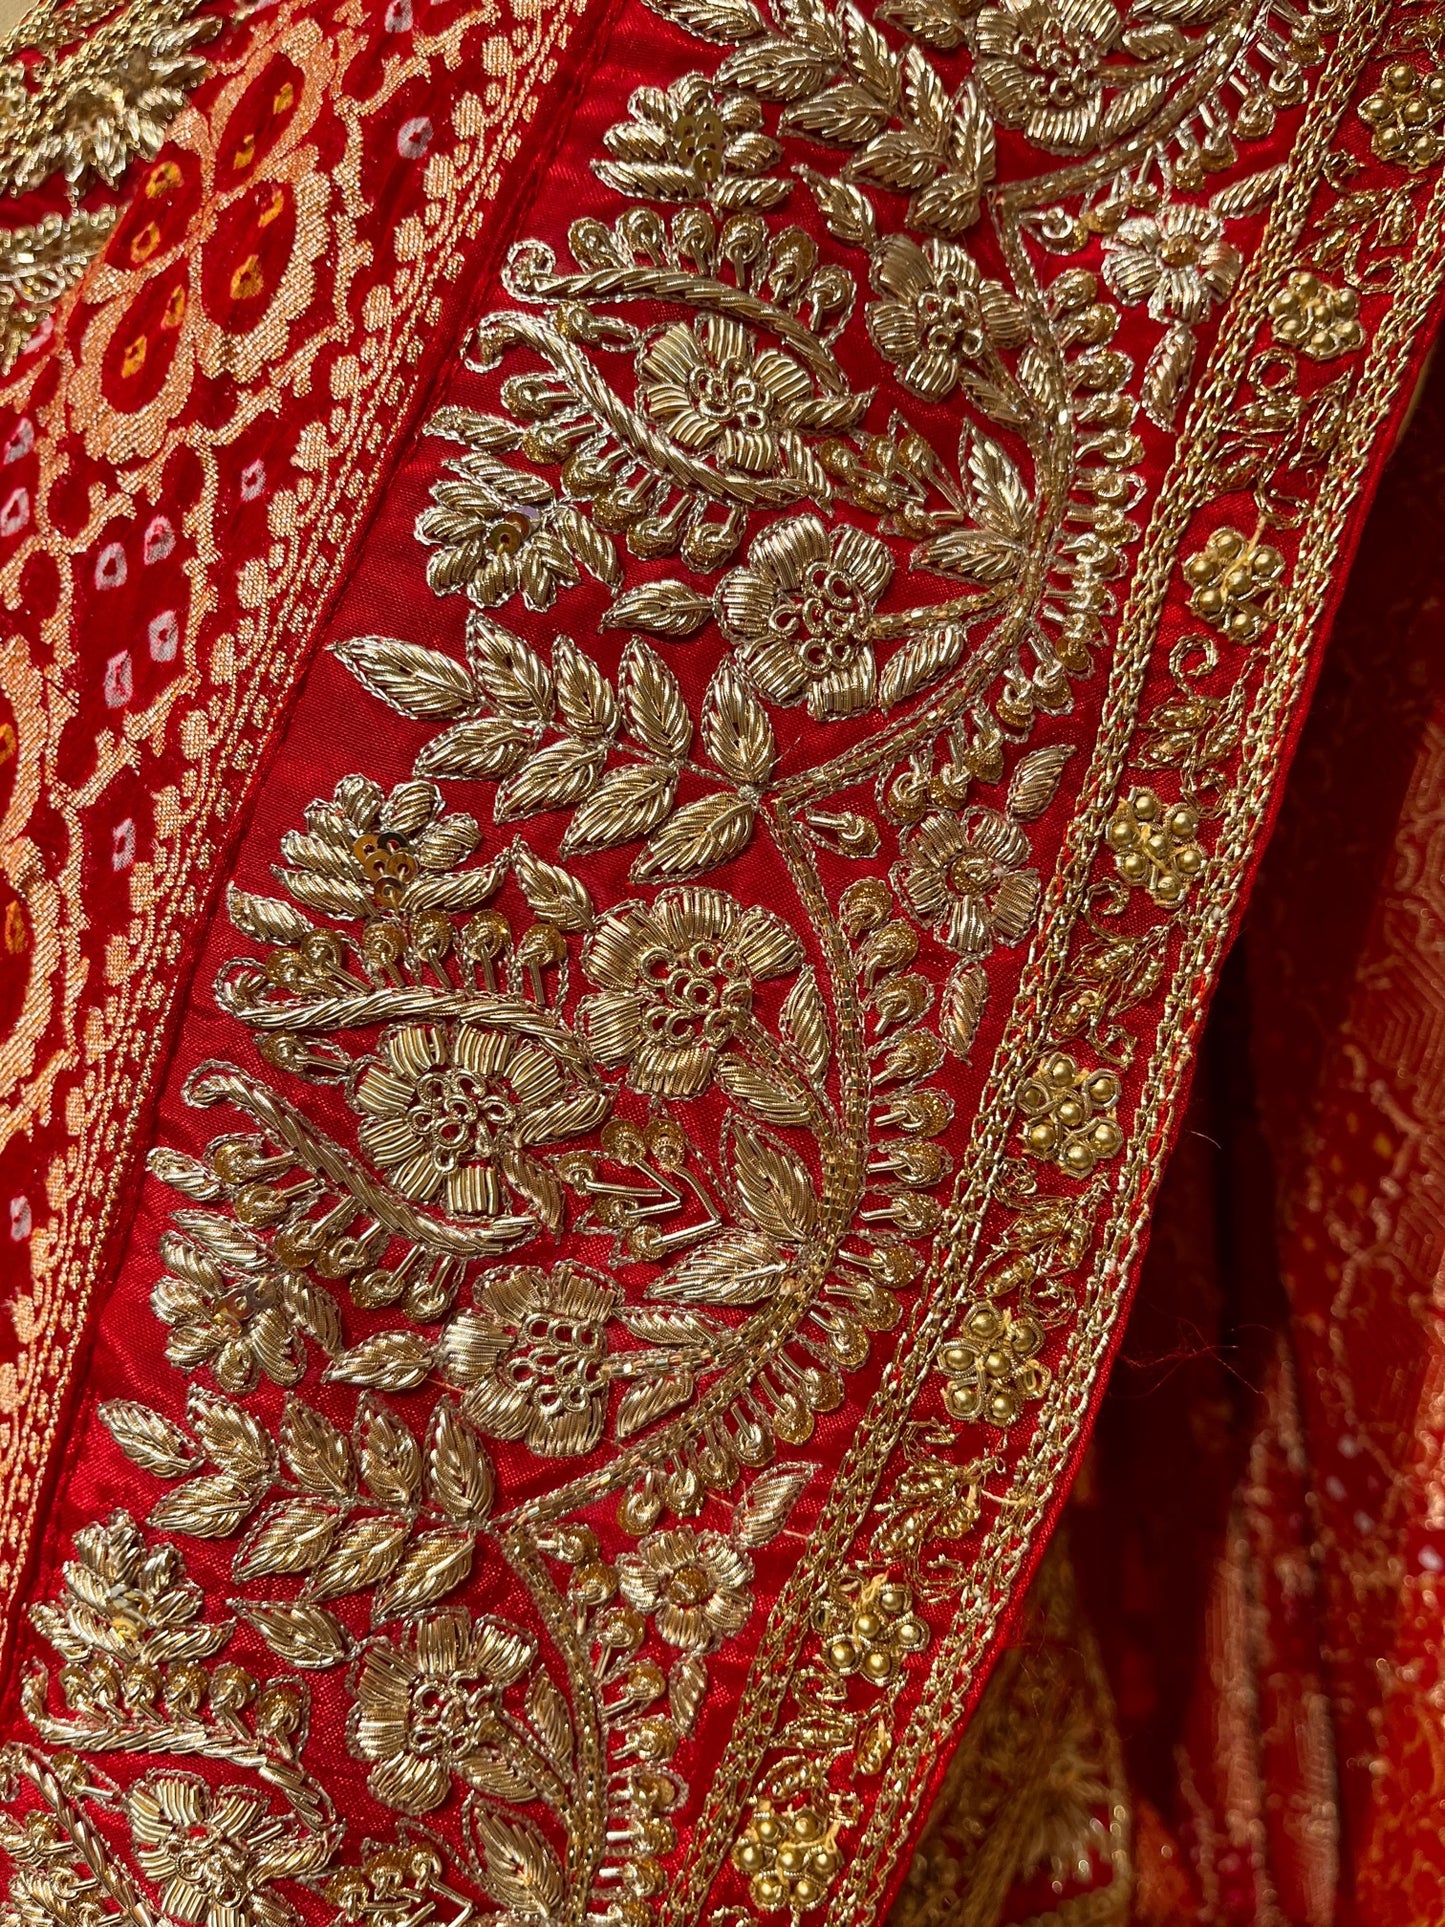 RED COLOUR GEORGETTE KHADDI SAREE EMBELLISHED WITH HAND EMBROIDERED ZARDOZI WORK